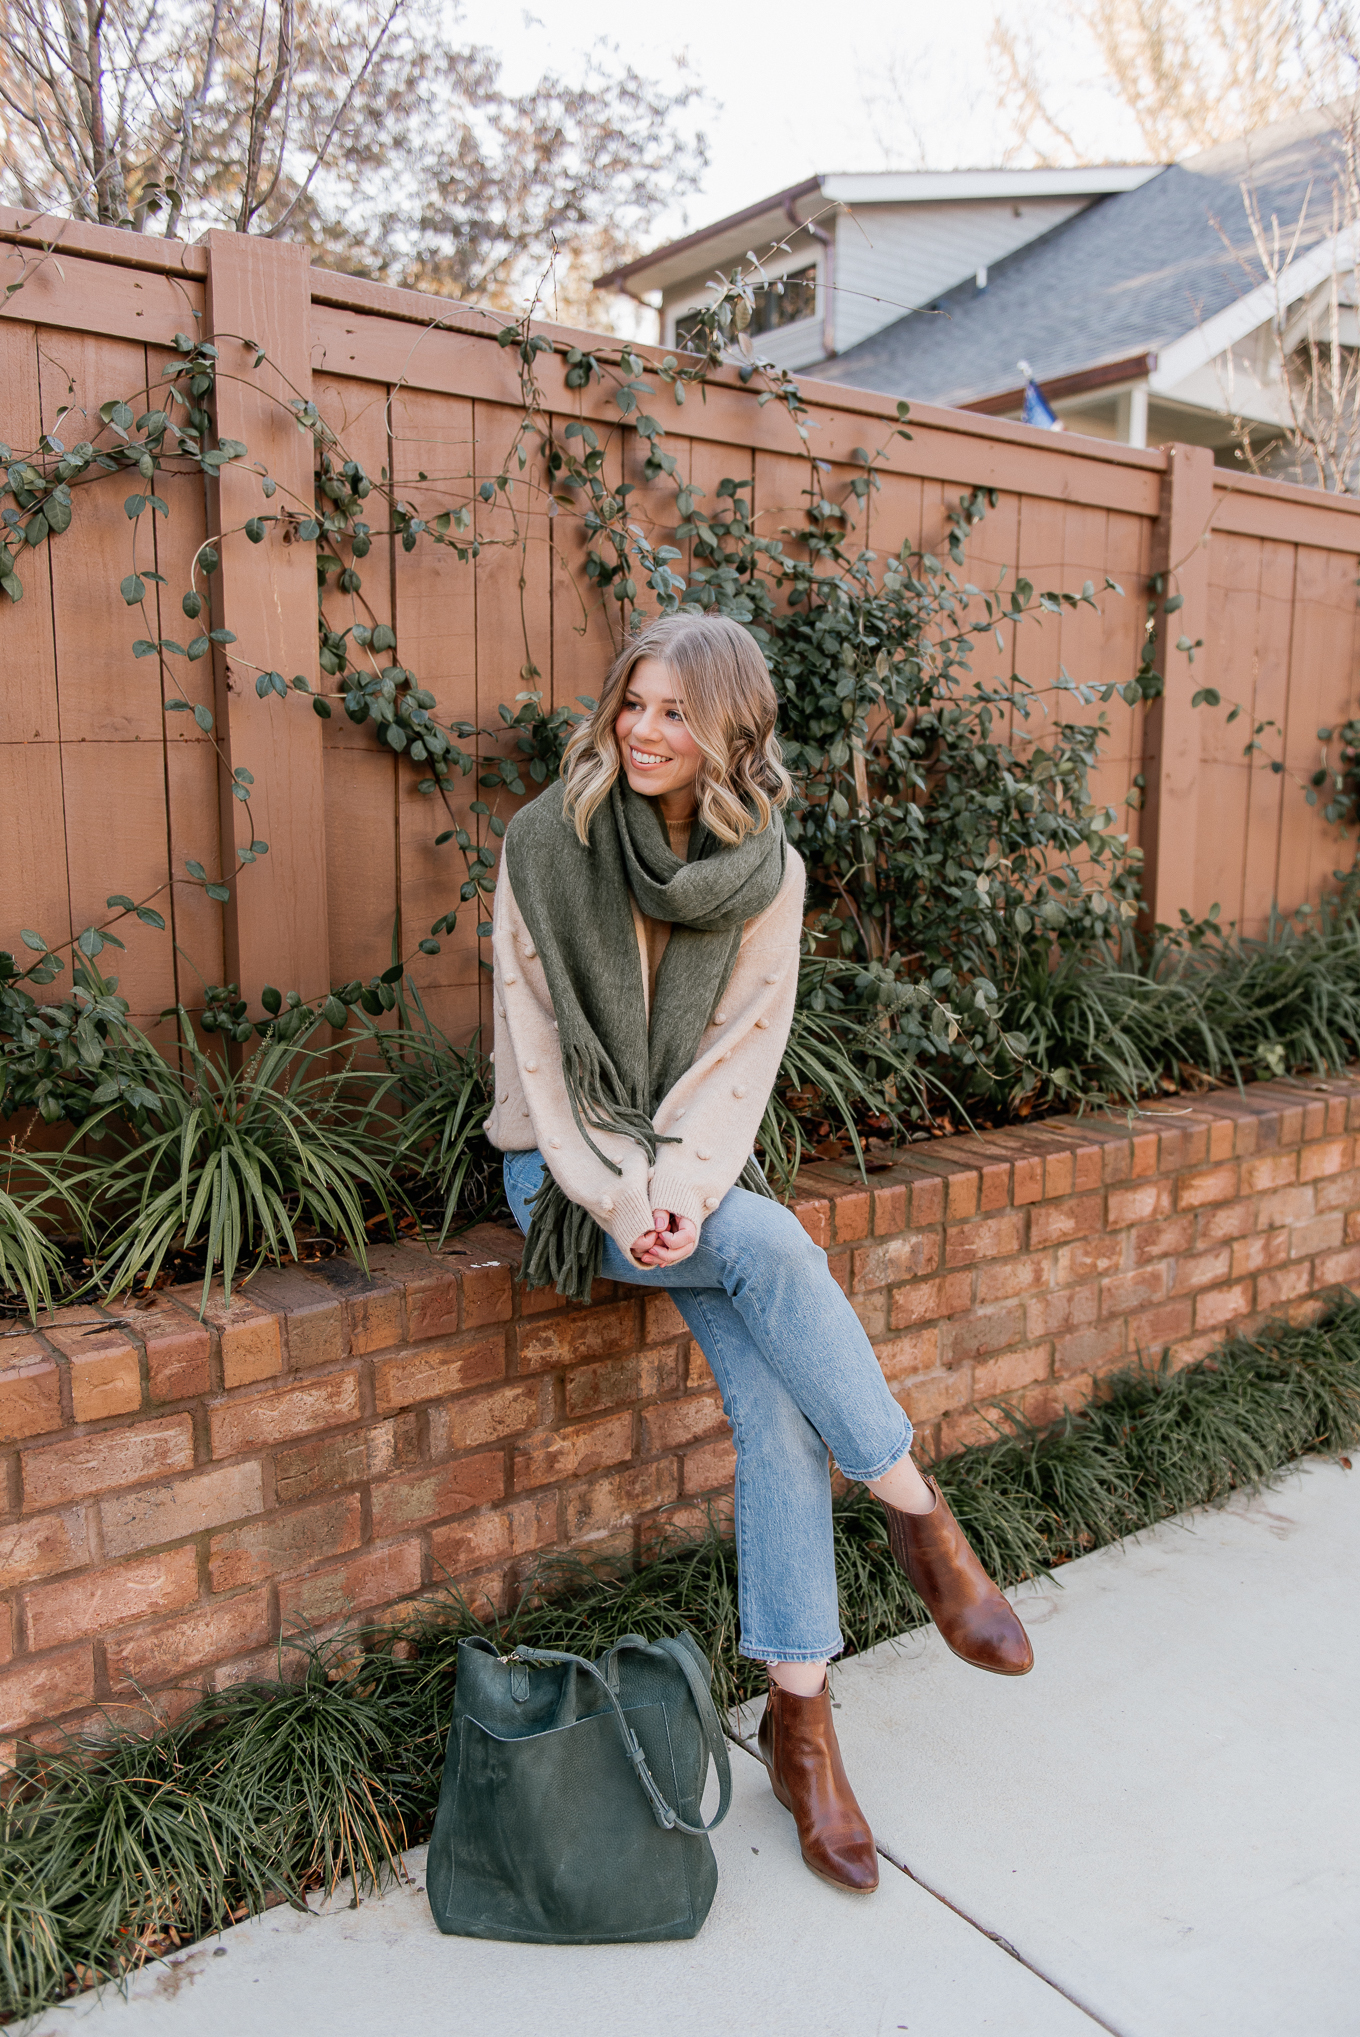 20 Things I want to Make Happen in 2020 | 2020 Goals | Olive Scarf, Pom-Pom Sweater | Louella Reese